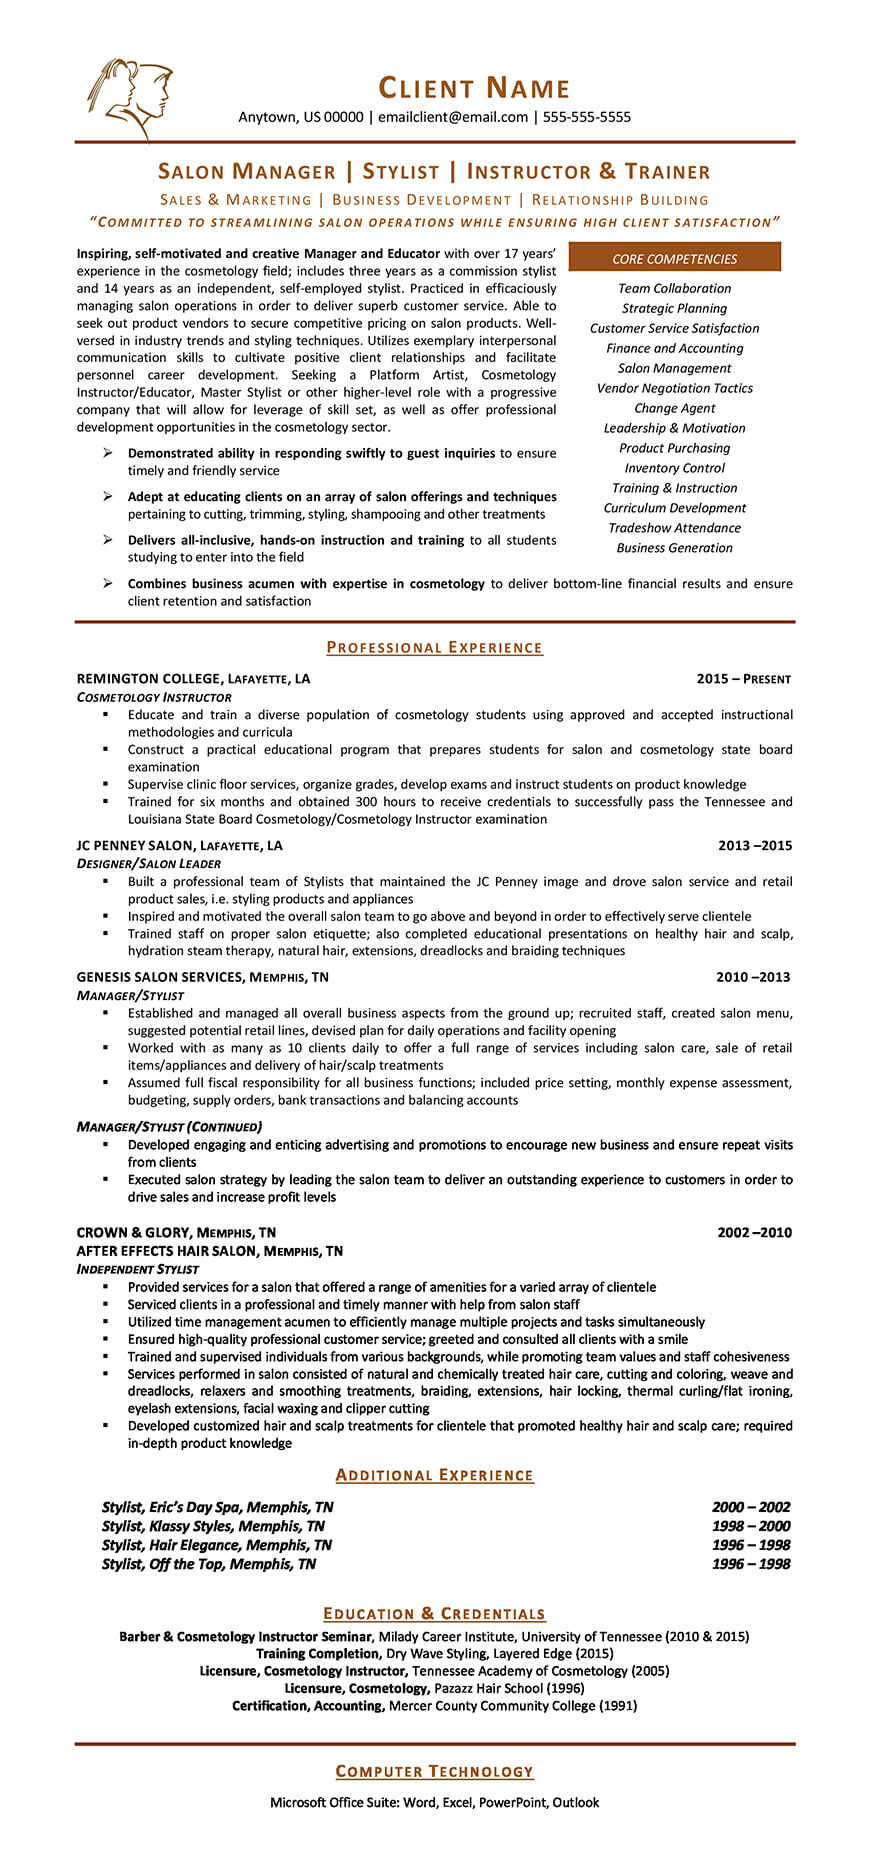 resume cover letter examples